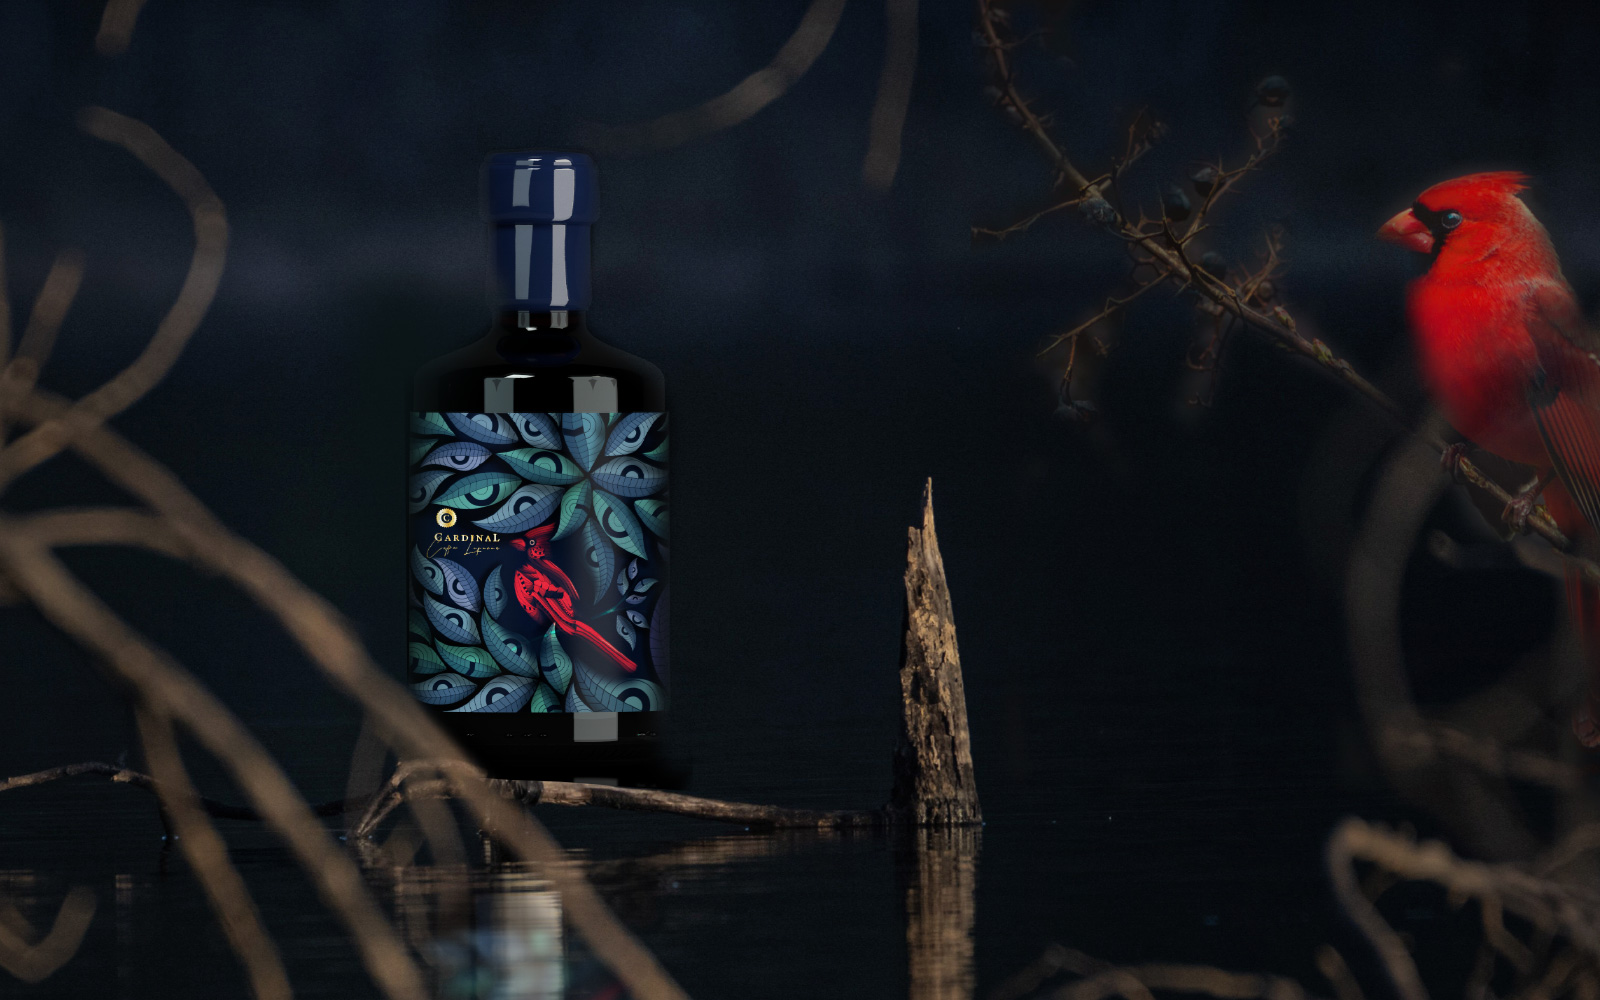 Cardinal coffee liqueur brand and packaging design by CreativeByDefinition Studio